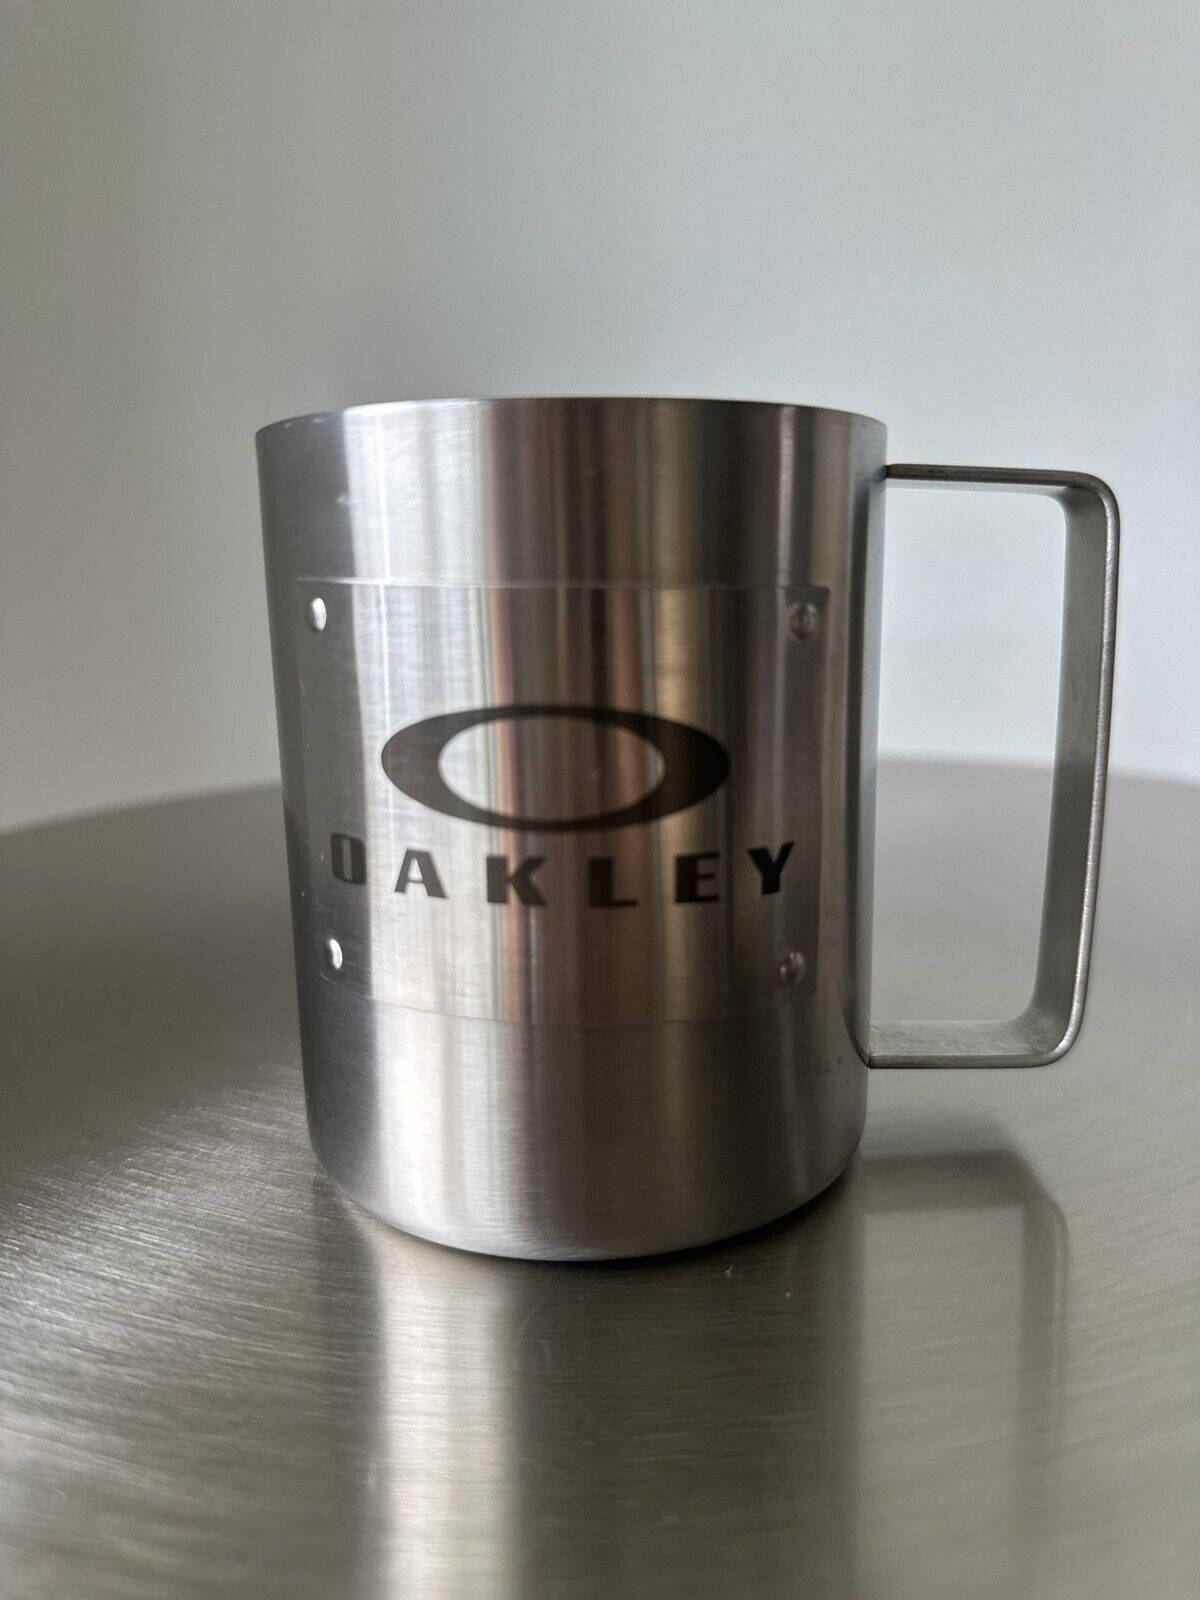 Rare Oakley Stainless Steel Mug Metal Promotional 2016 Pre Owned 